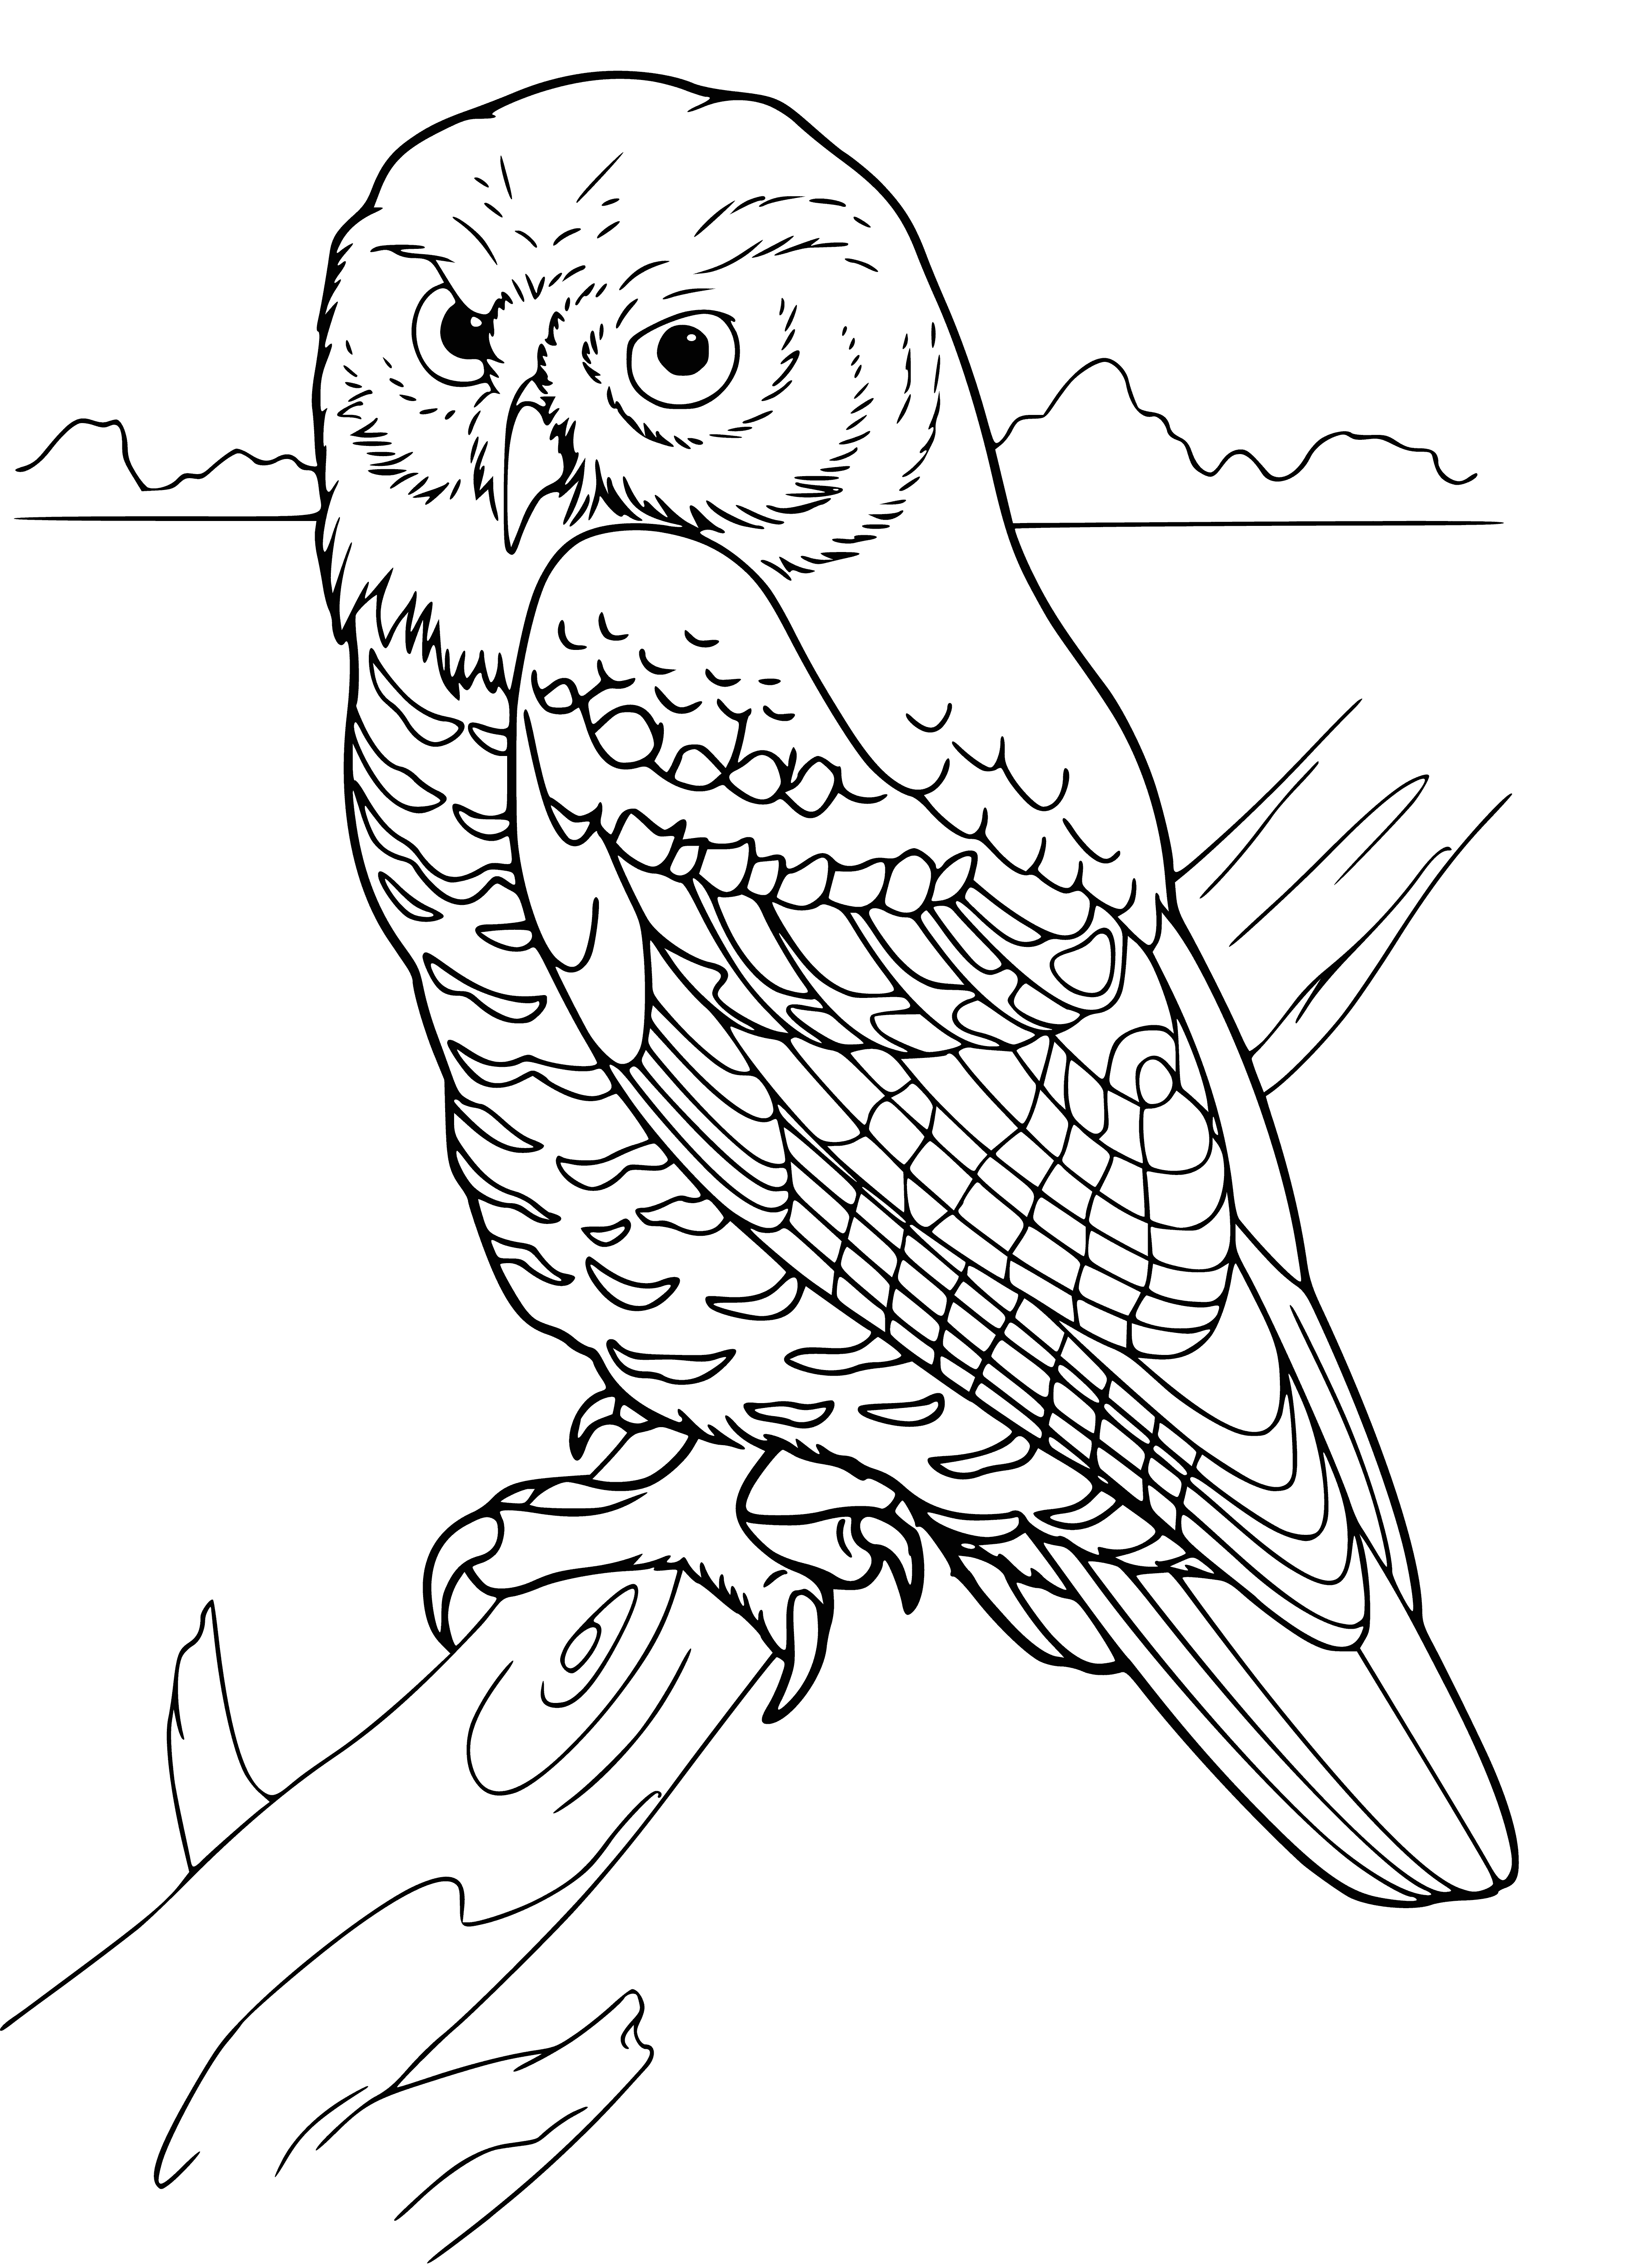 coloring page: Large bird with big eyes, hooked beak, brown w/ white spots & long wings, perched on a branch.